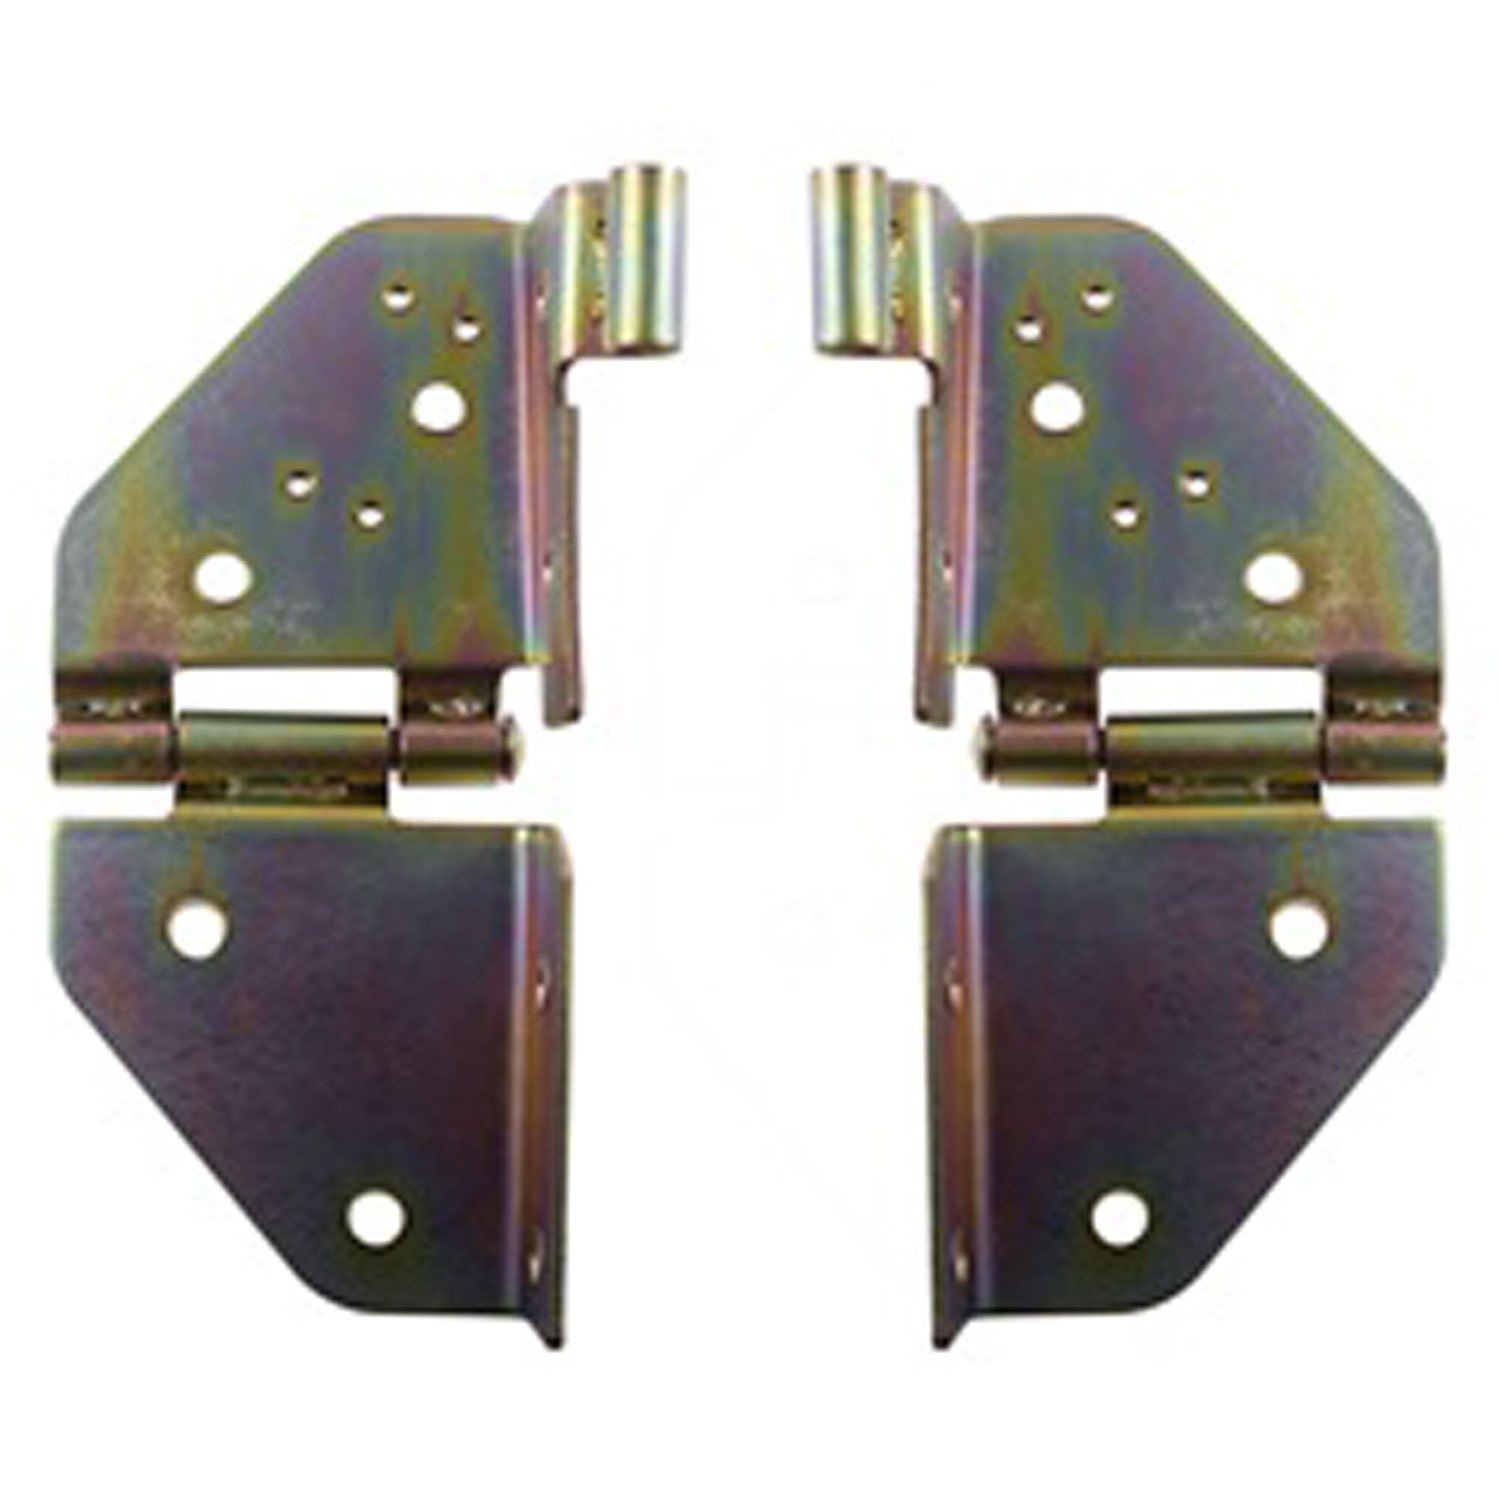 This pair of windshield hinges from Omix-ADA fit 76-83 Jeep CJ5 76-86 CJ7 and 81-86 CJ8.